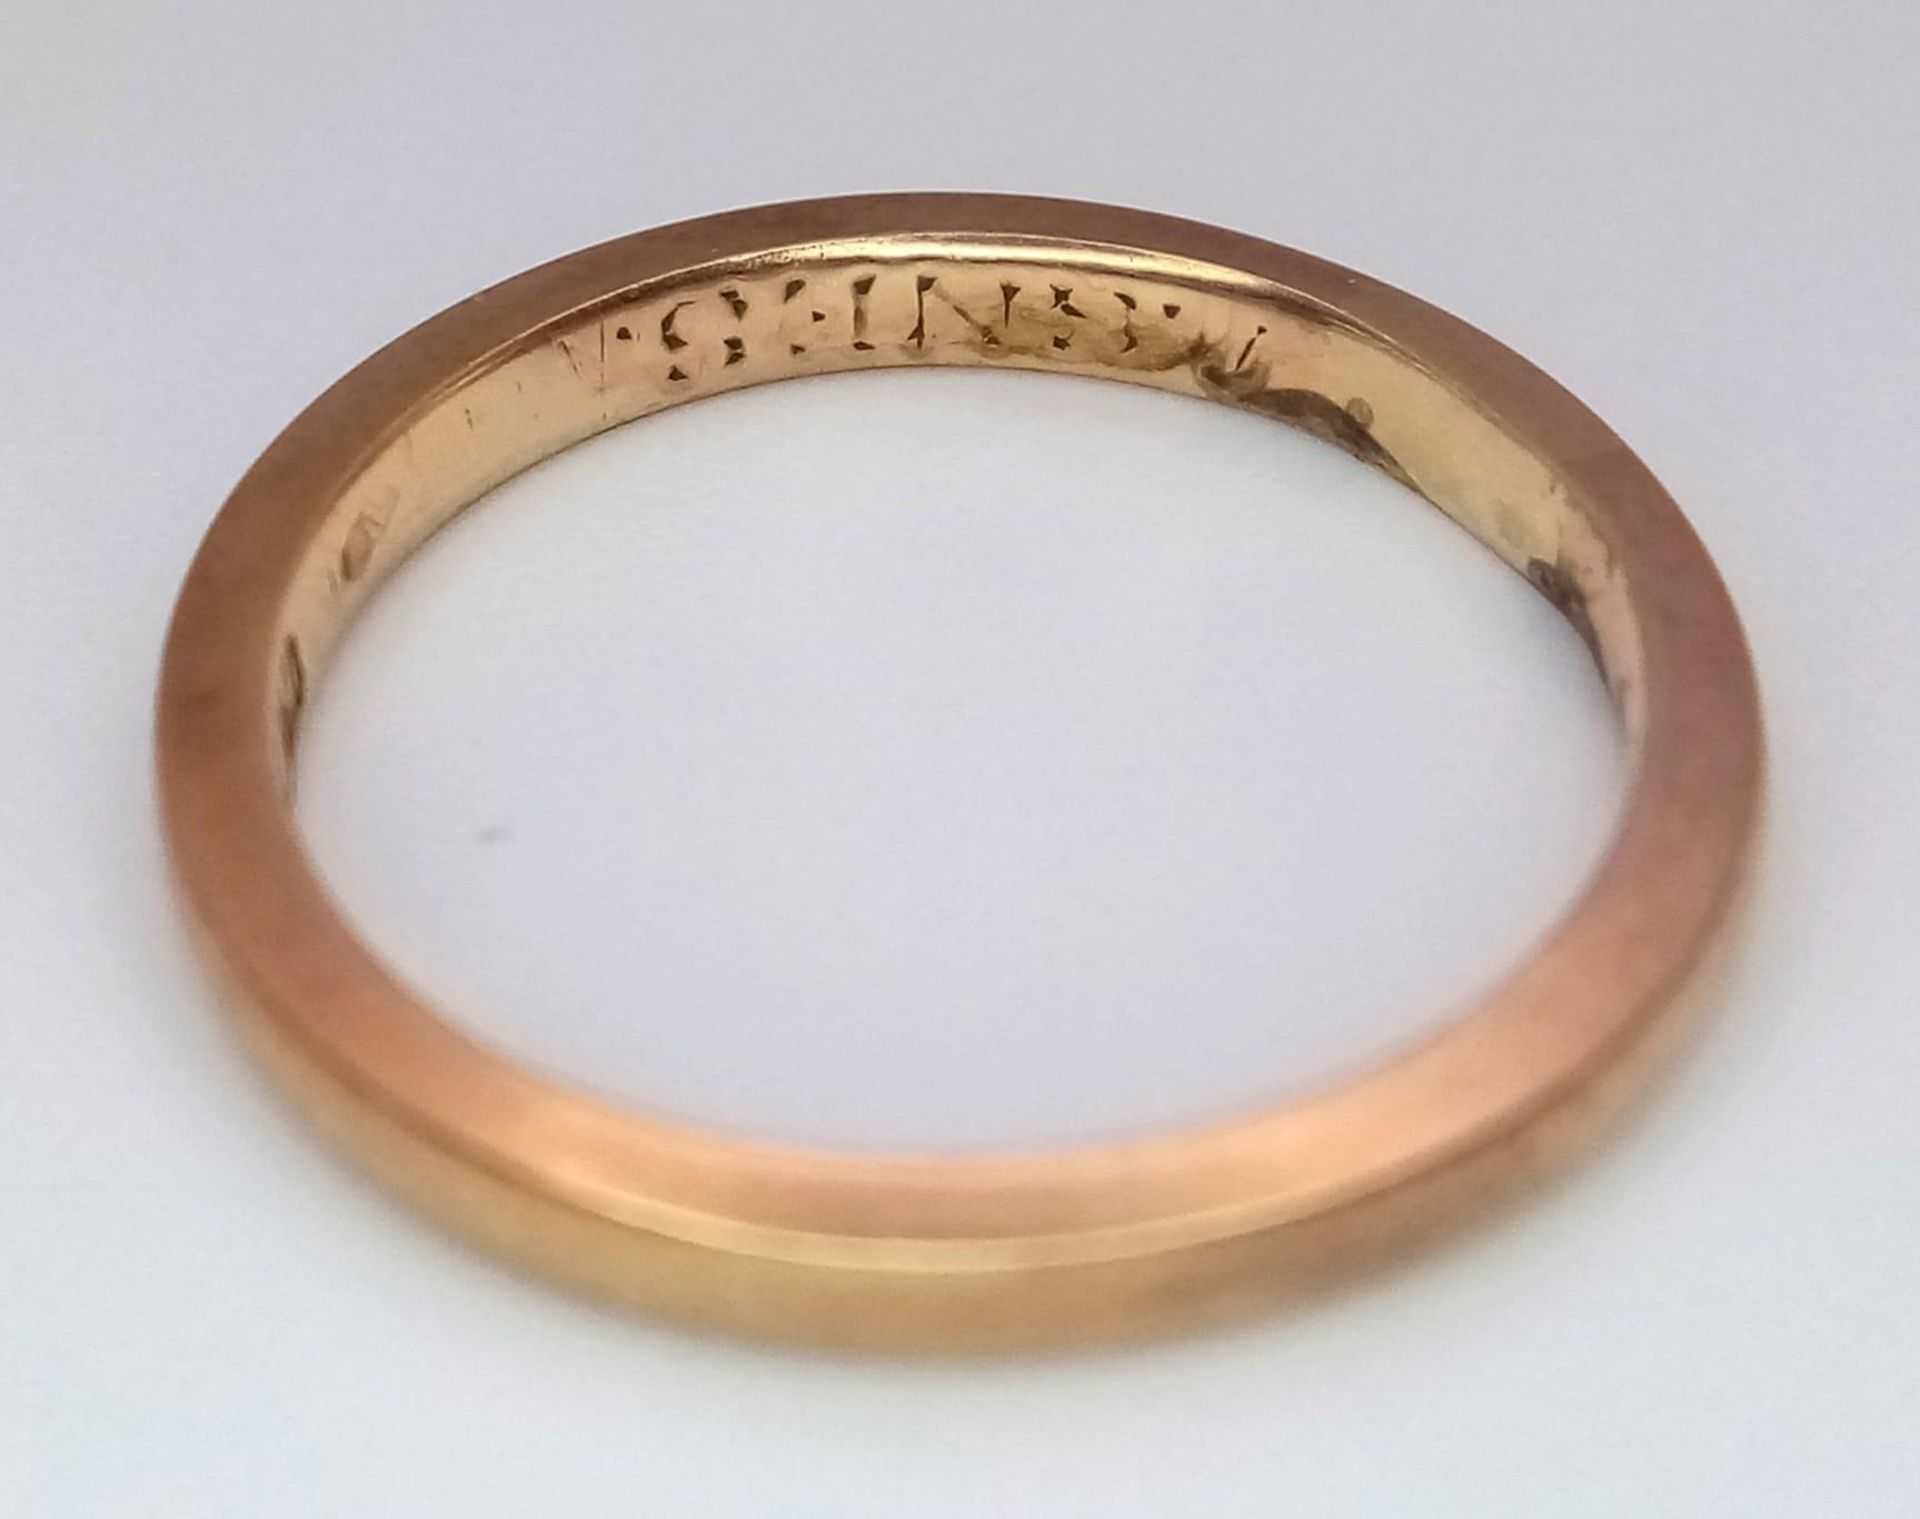 A Vintage 9K Yellow Gold Band Ring. Size L. 1.95g weight. - Image 3 of 4